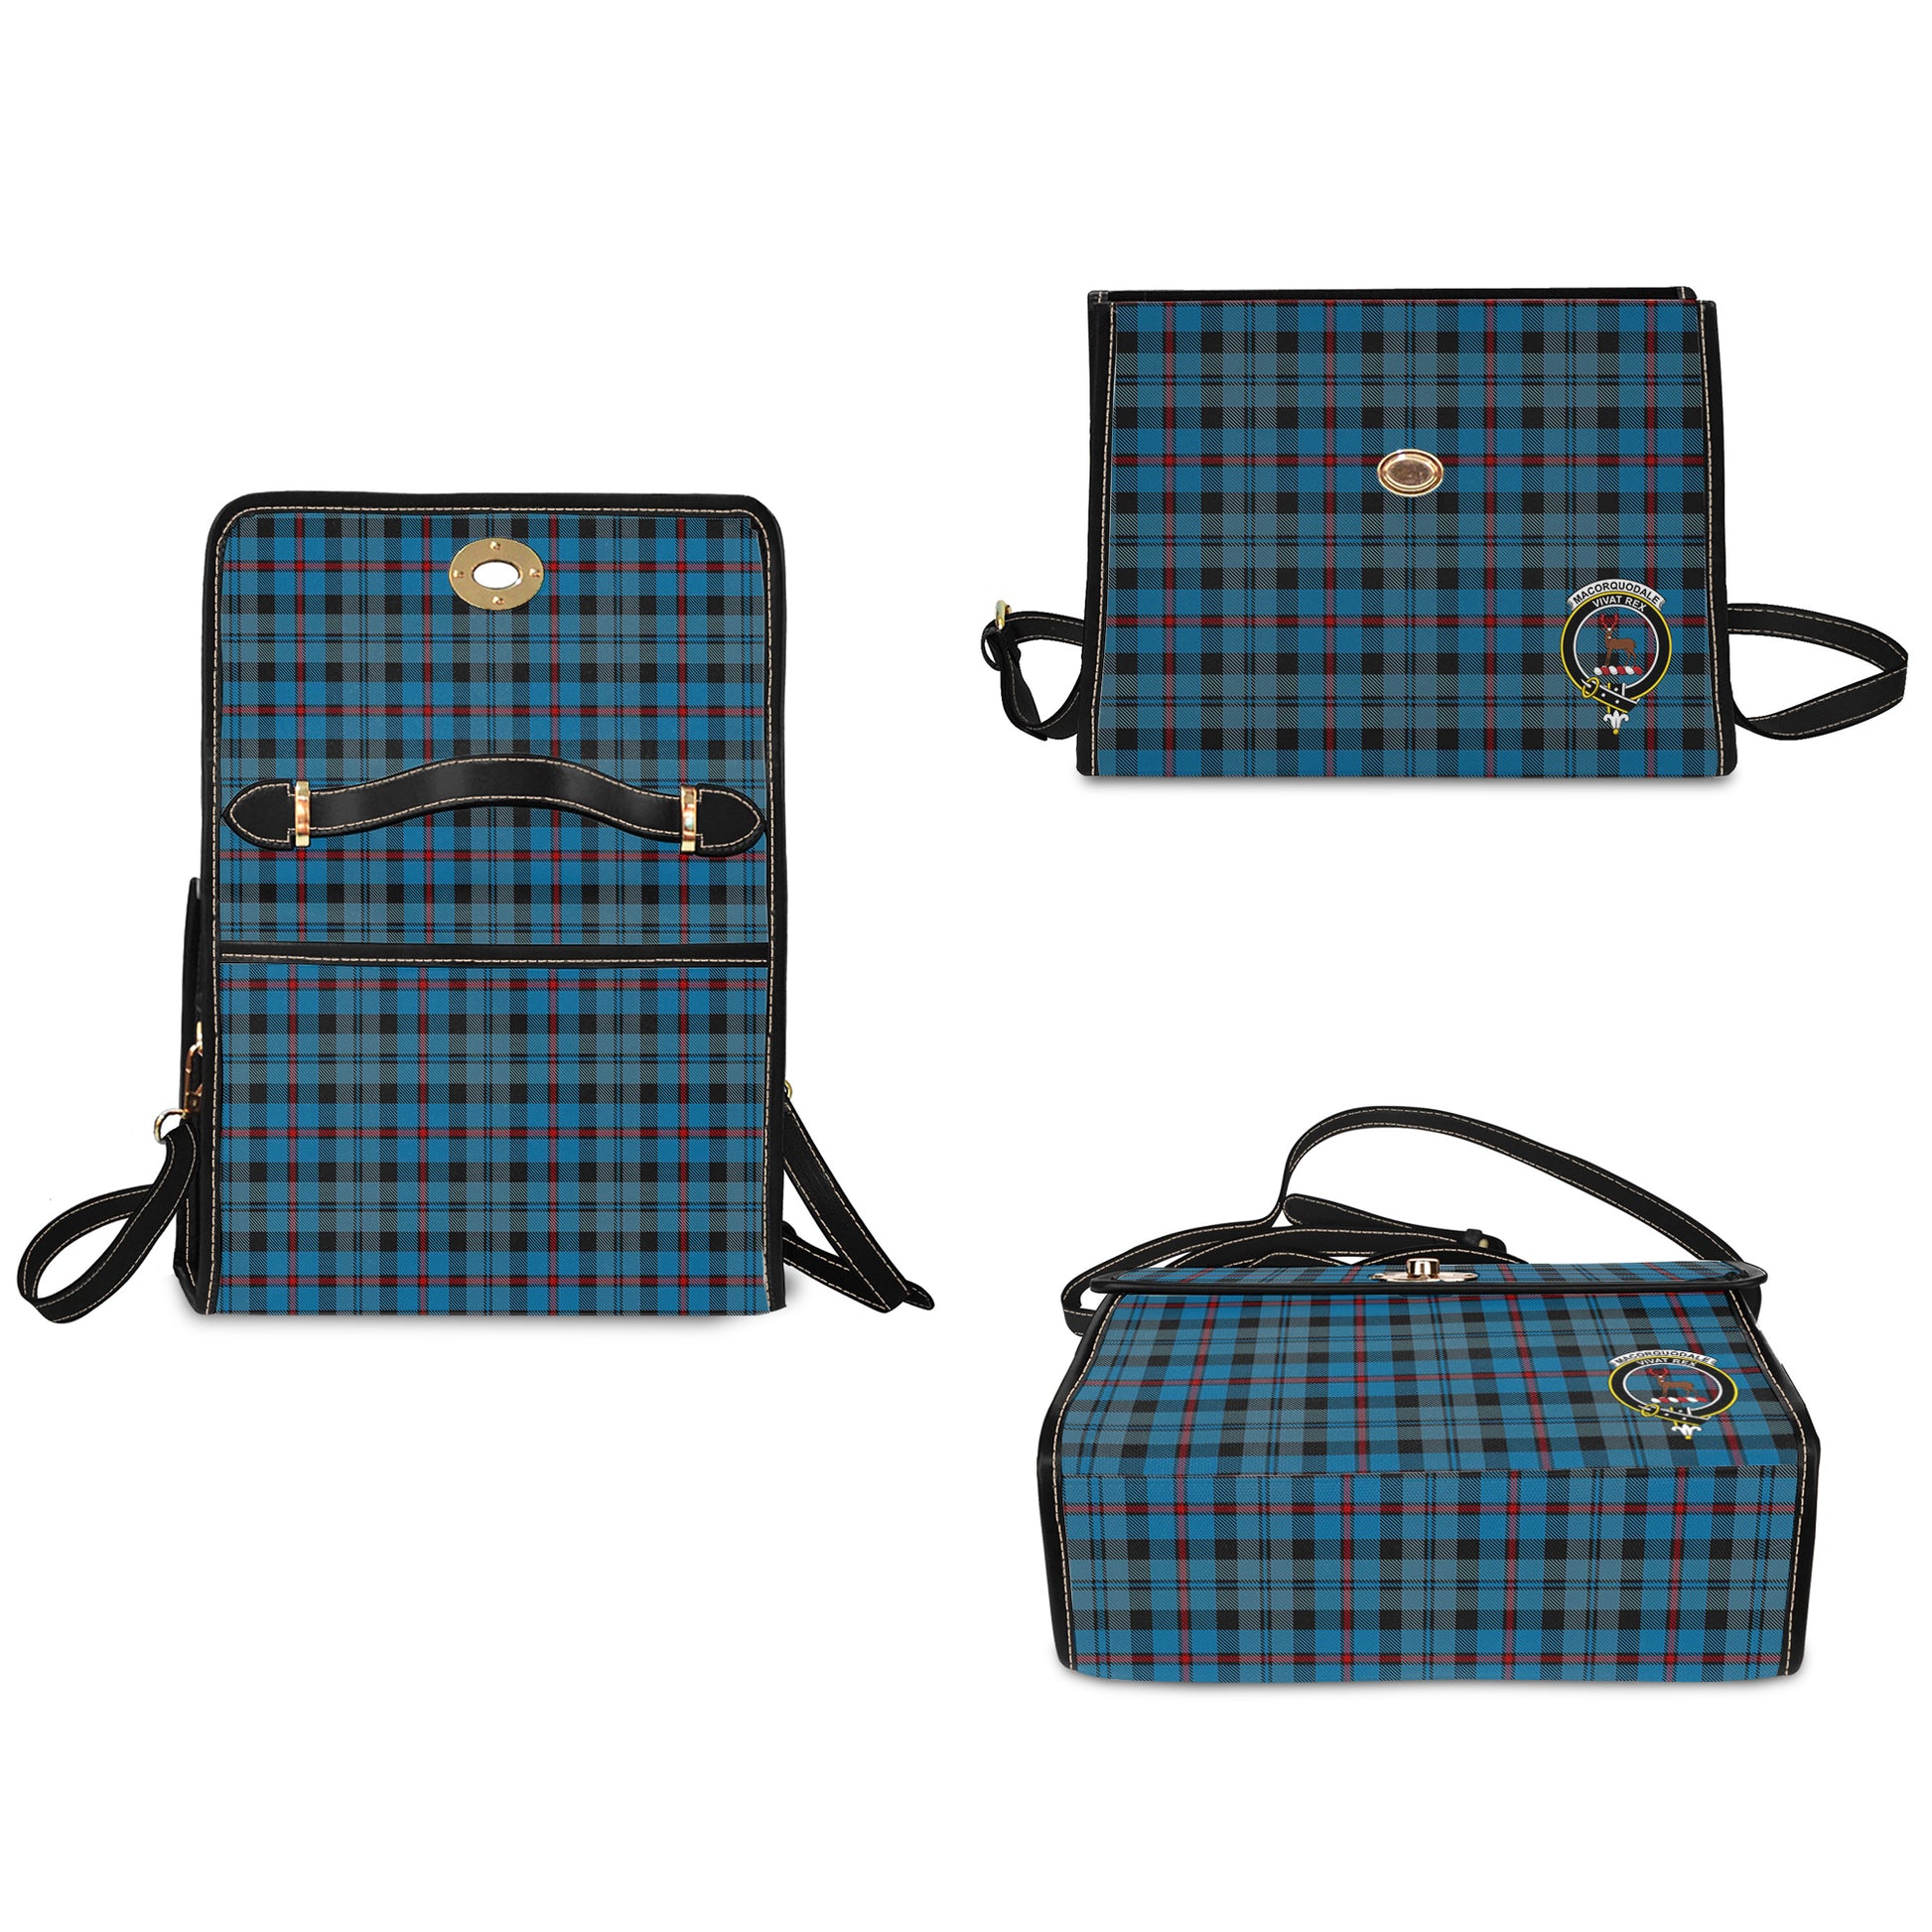 maccorquodale-tartan-leather-strap-waterproof-canvas-bag-with-family-crest